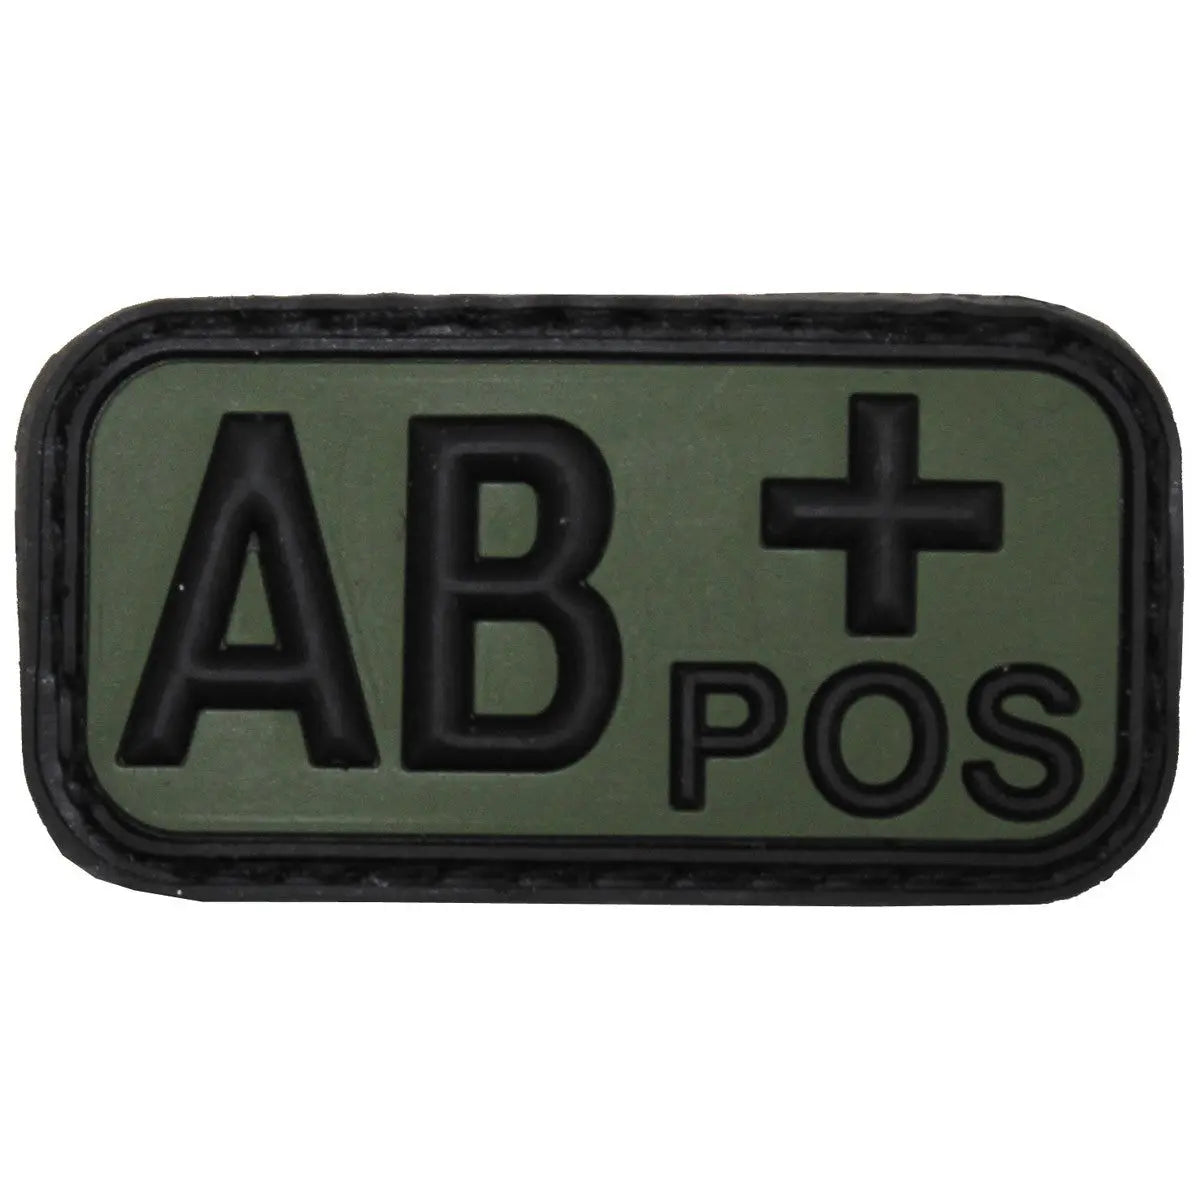 Velcro Patch, black-OD green, blood group "AB POS", 3D NSO Gear